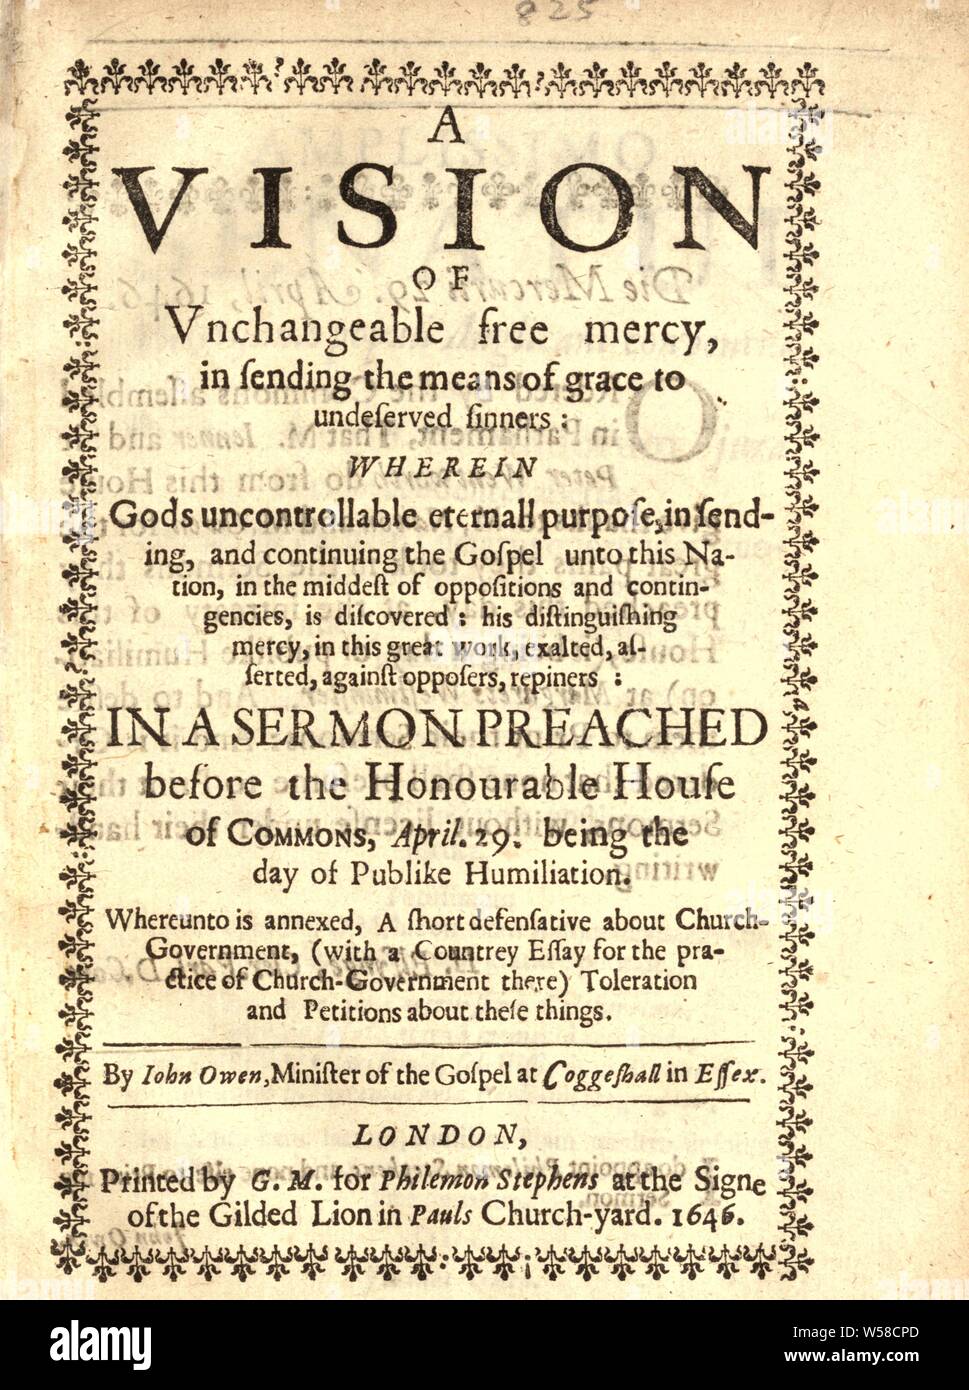 A vision of vnchangeable free mercy, in sending the means of grace to undeserved sinners ... In a sermon preached before the Honourable House of Commons, April 29. being the day of publike humiliation. Whereunto is annexed, A short defensative about church-government ... toleration and petitions about these things : Owen, John, 1616-1683 Stock Photo